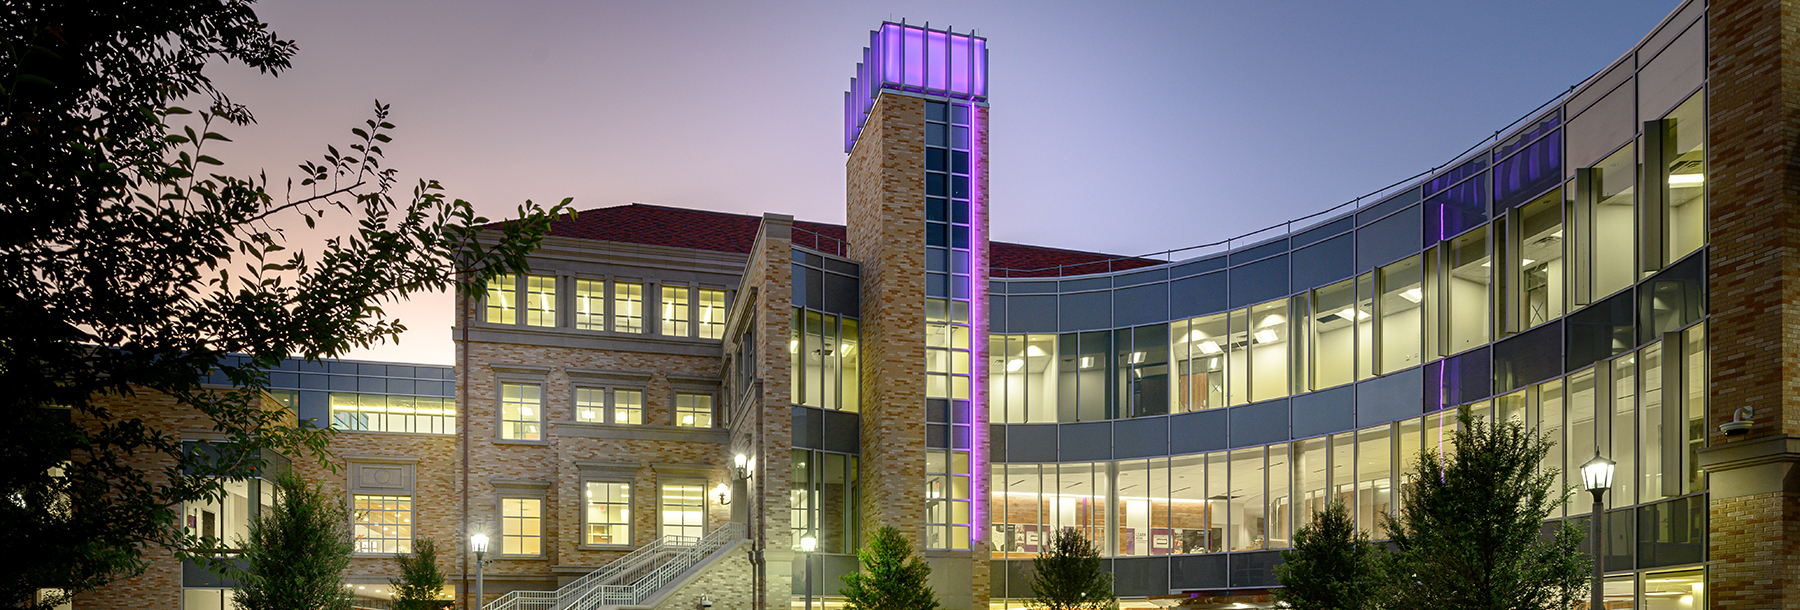 Section Image: Neeley School building at twilight 